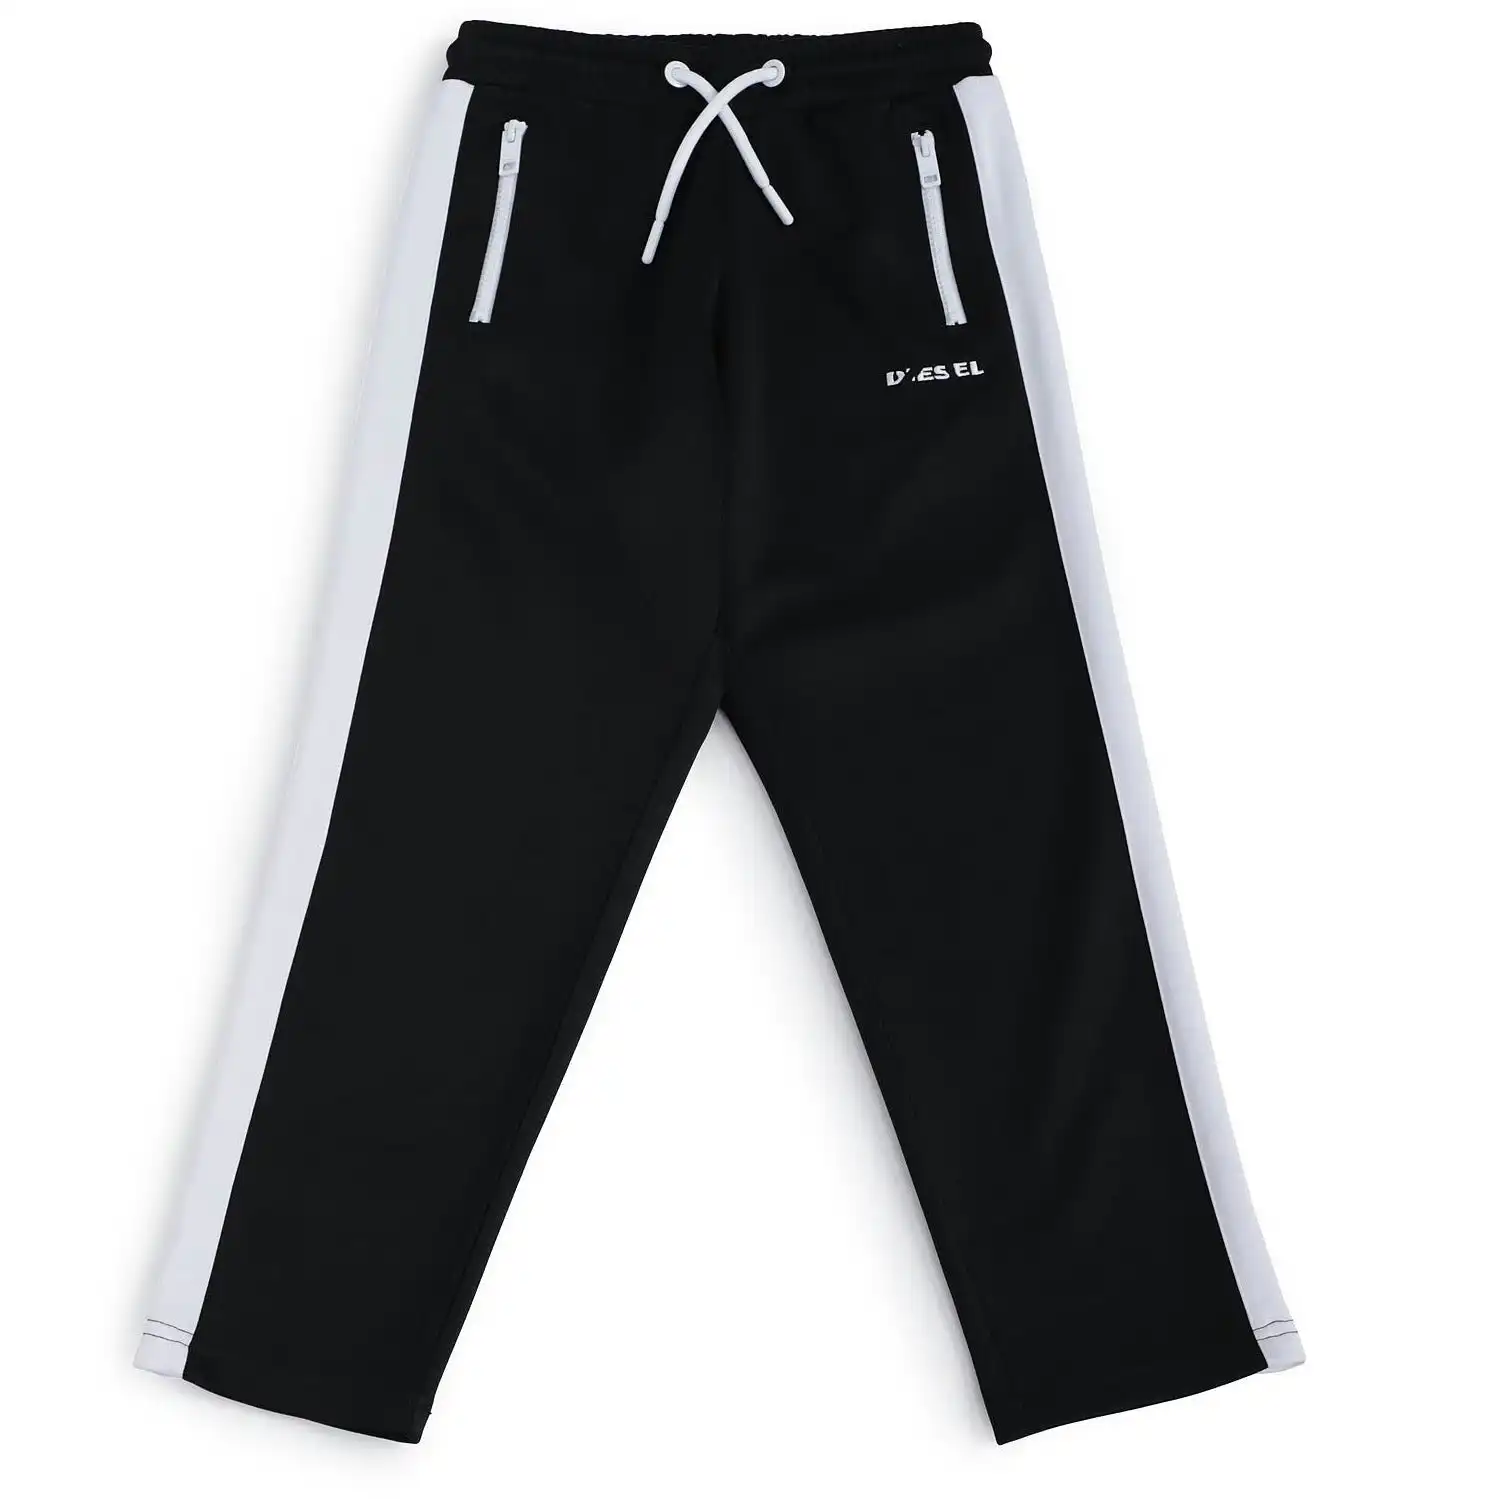 Diesel Kids Unisex Black Joggers with White Sides